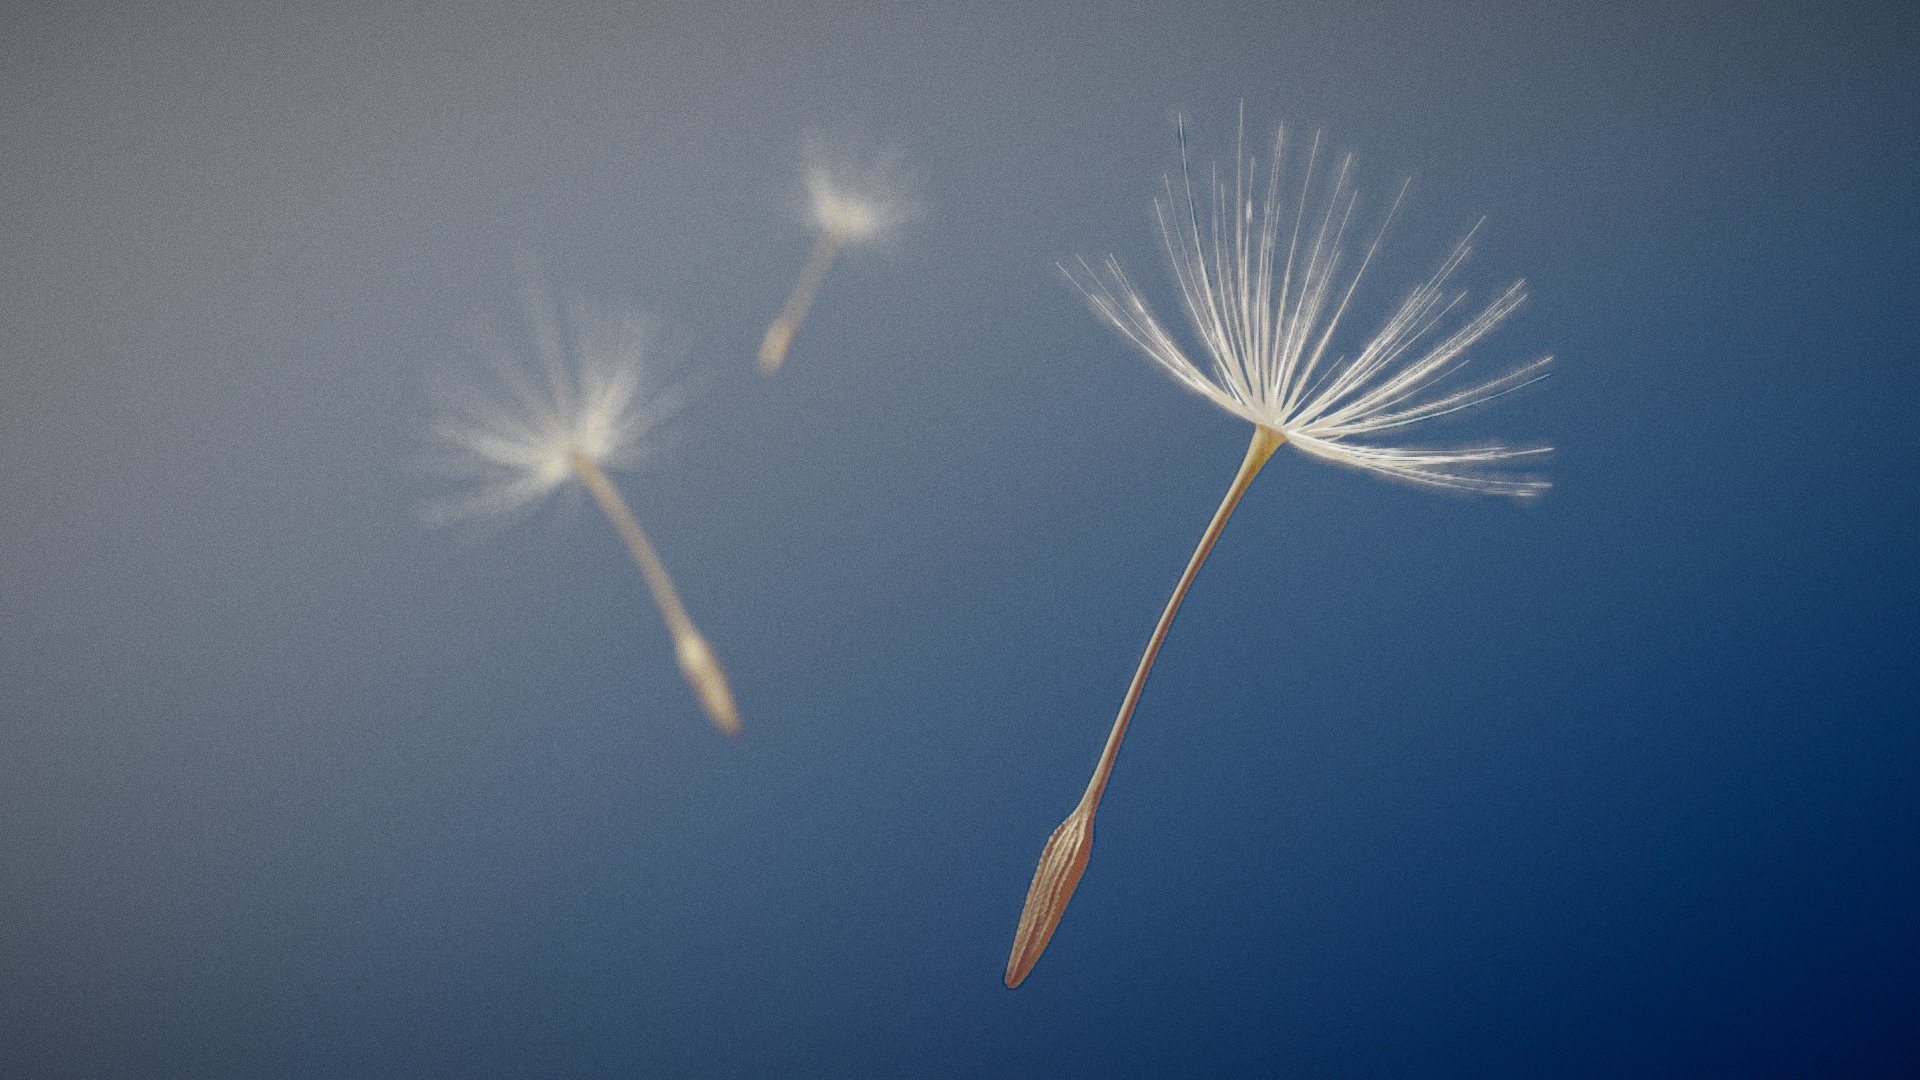 Made for SculptJanuary19. Sculpted in Blender.

Included in purchase:

High poly sculpt of 1 dandelion seed (880k polys) - SculptJanuary19 Day06: Minimalistic - Tiny - Buy Royalty Free 3D model by Keith Morgan (@keith.morgan) 3d model